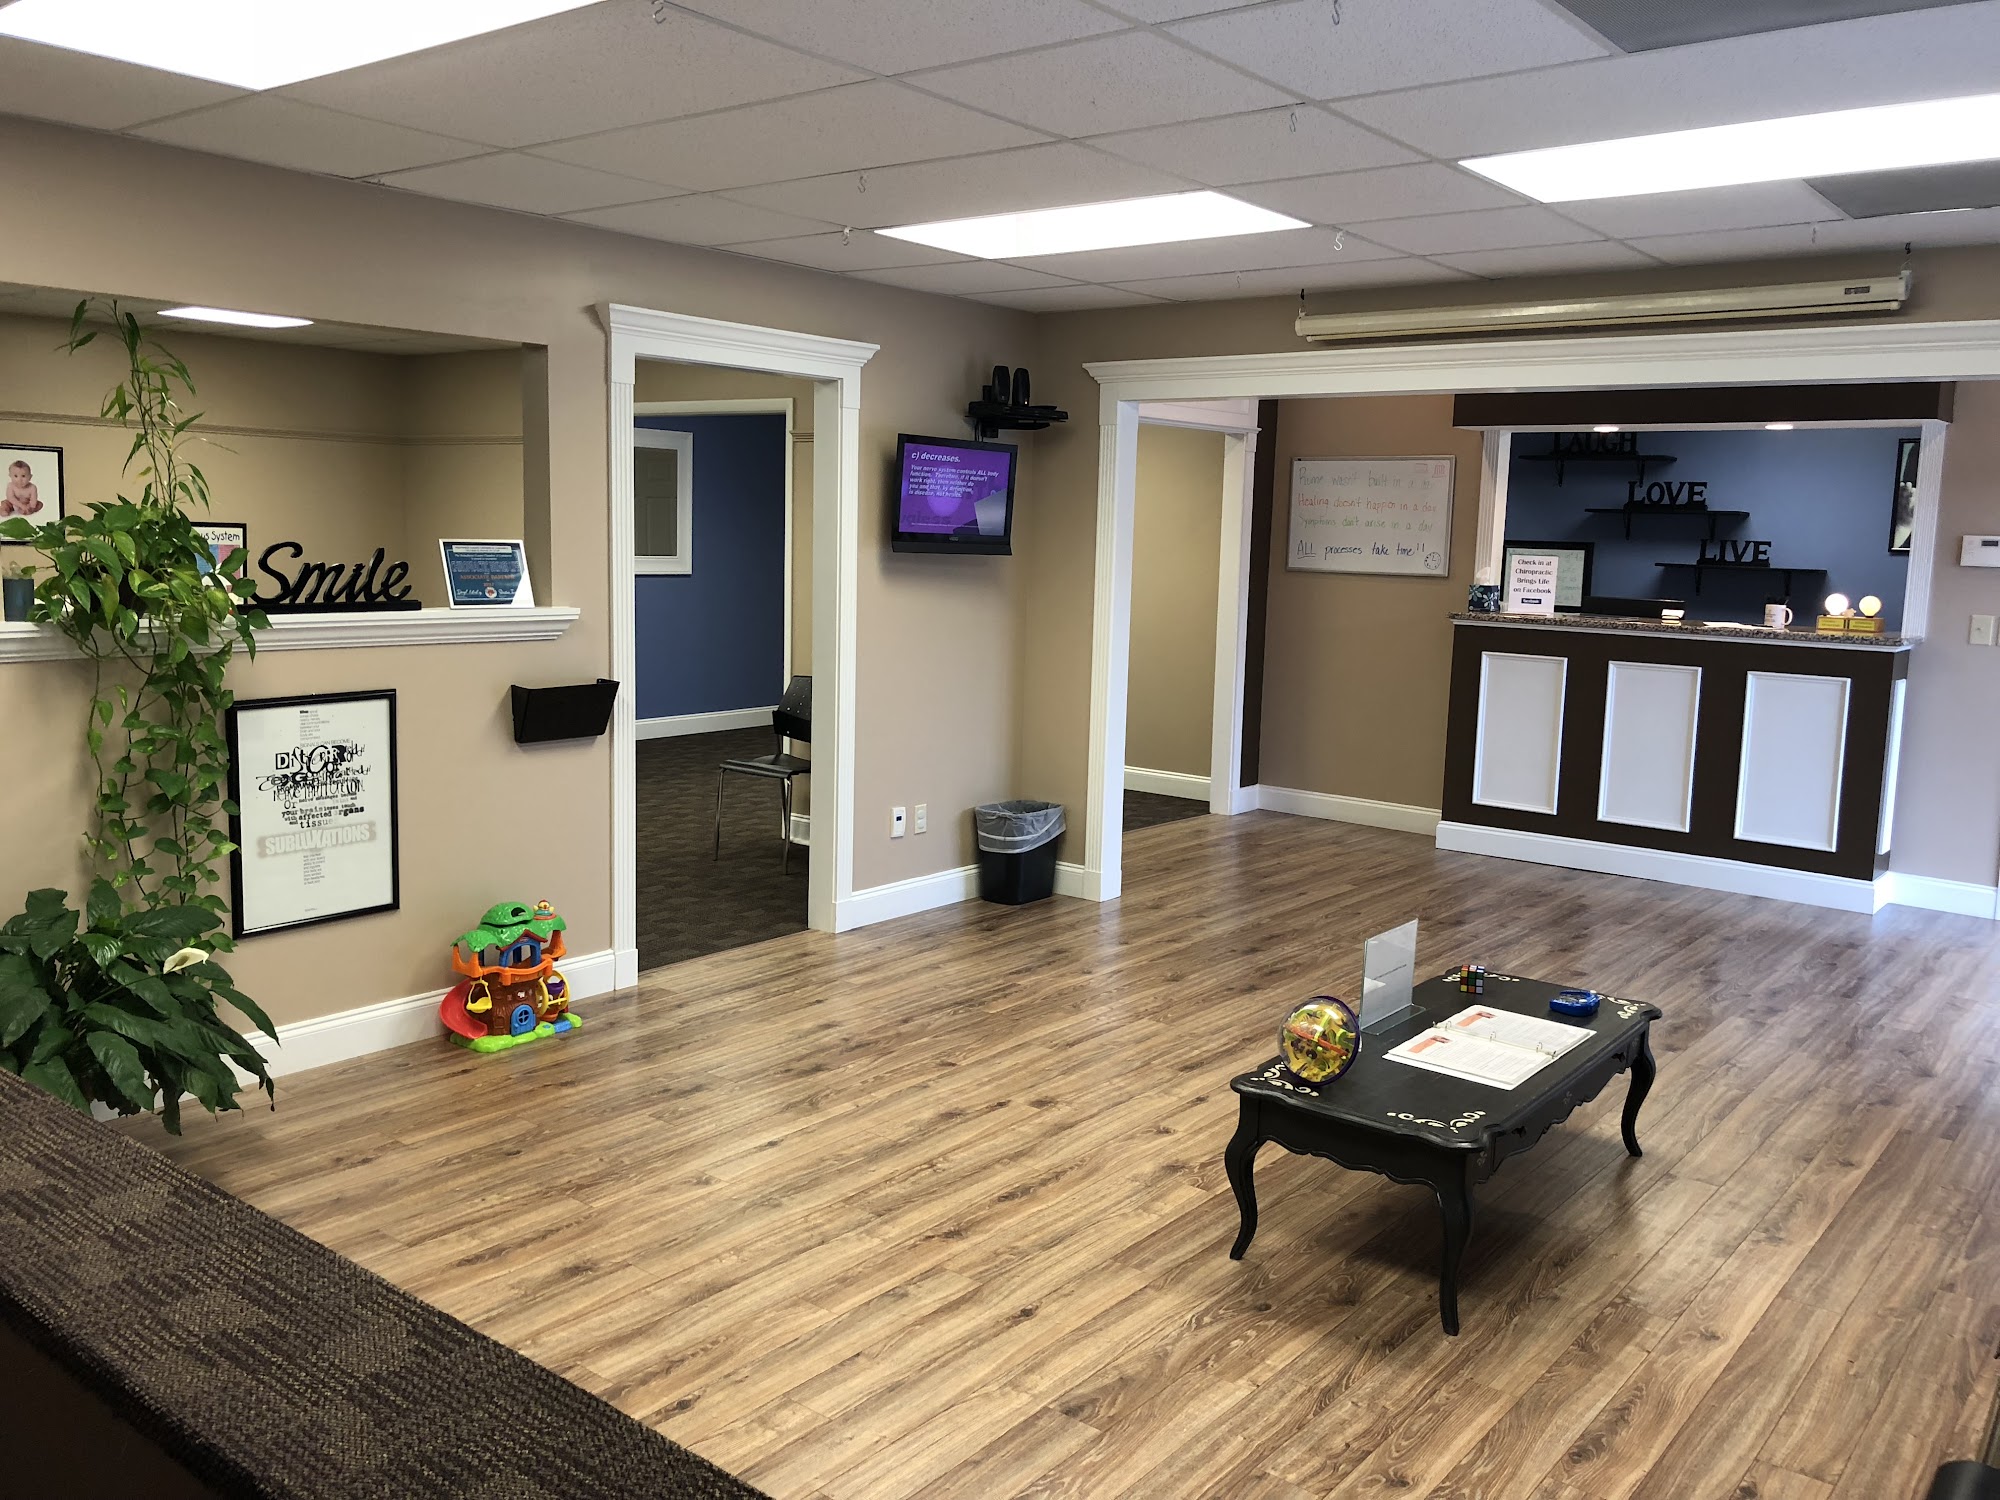 Chiropractic Brings Life 103 Pavo Ave, Waverly Tennessee 37185